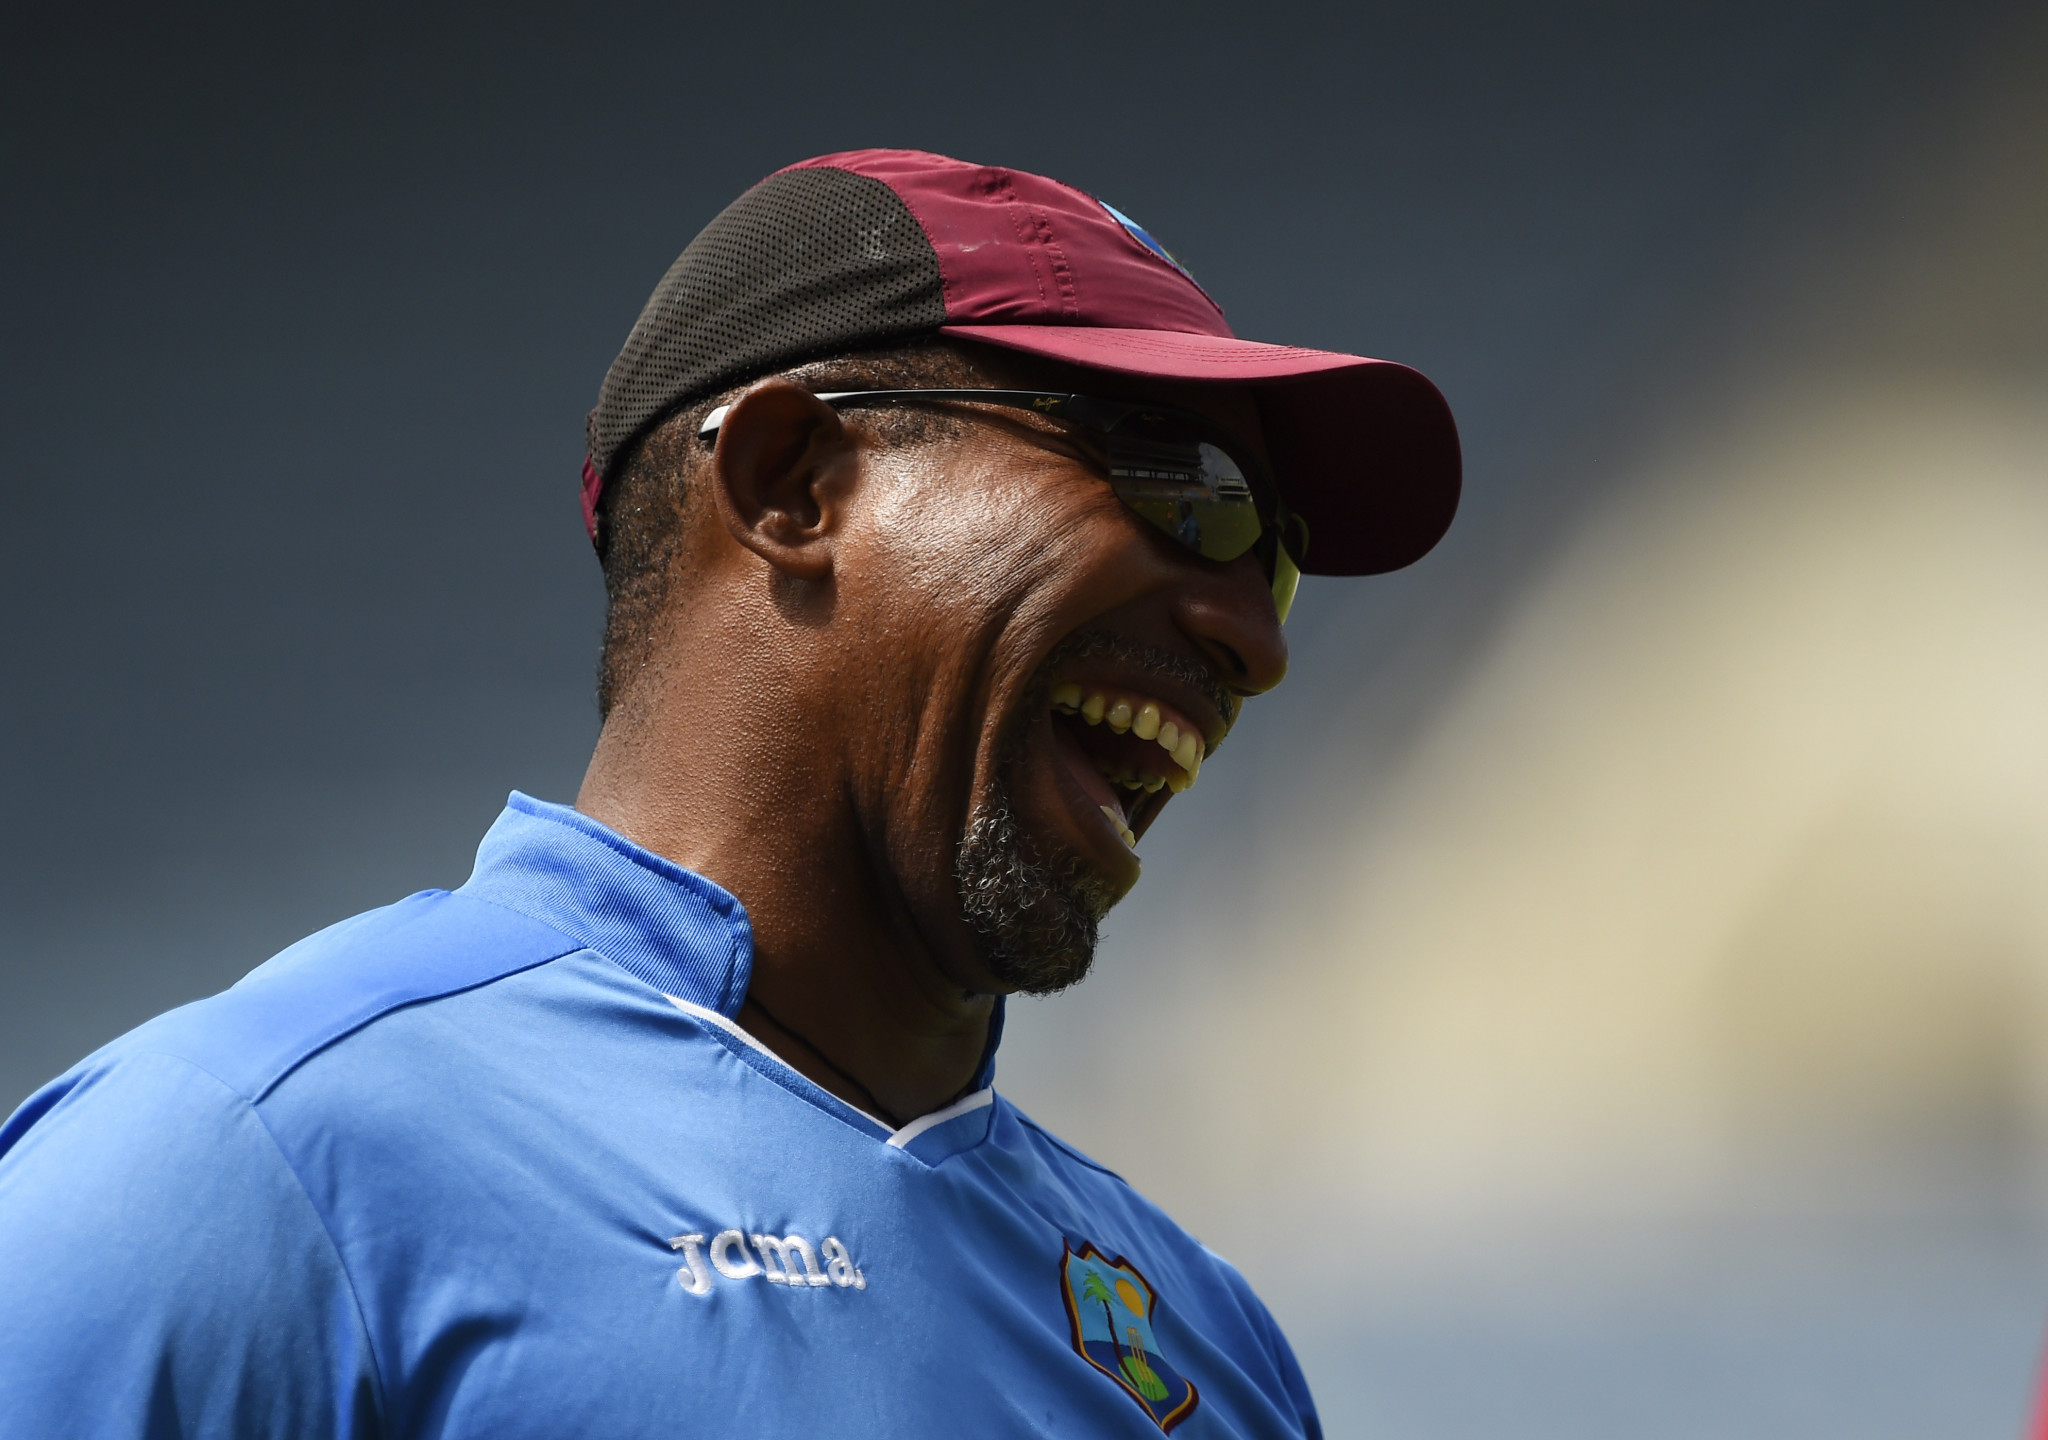 Commonwealth Games inclusion, where the Caribbean countries would compete separately, would re-energise the West Indies cricket team, according to CANOC President Brian Lewis ©Getty Images 